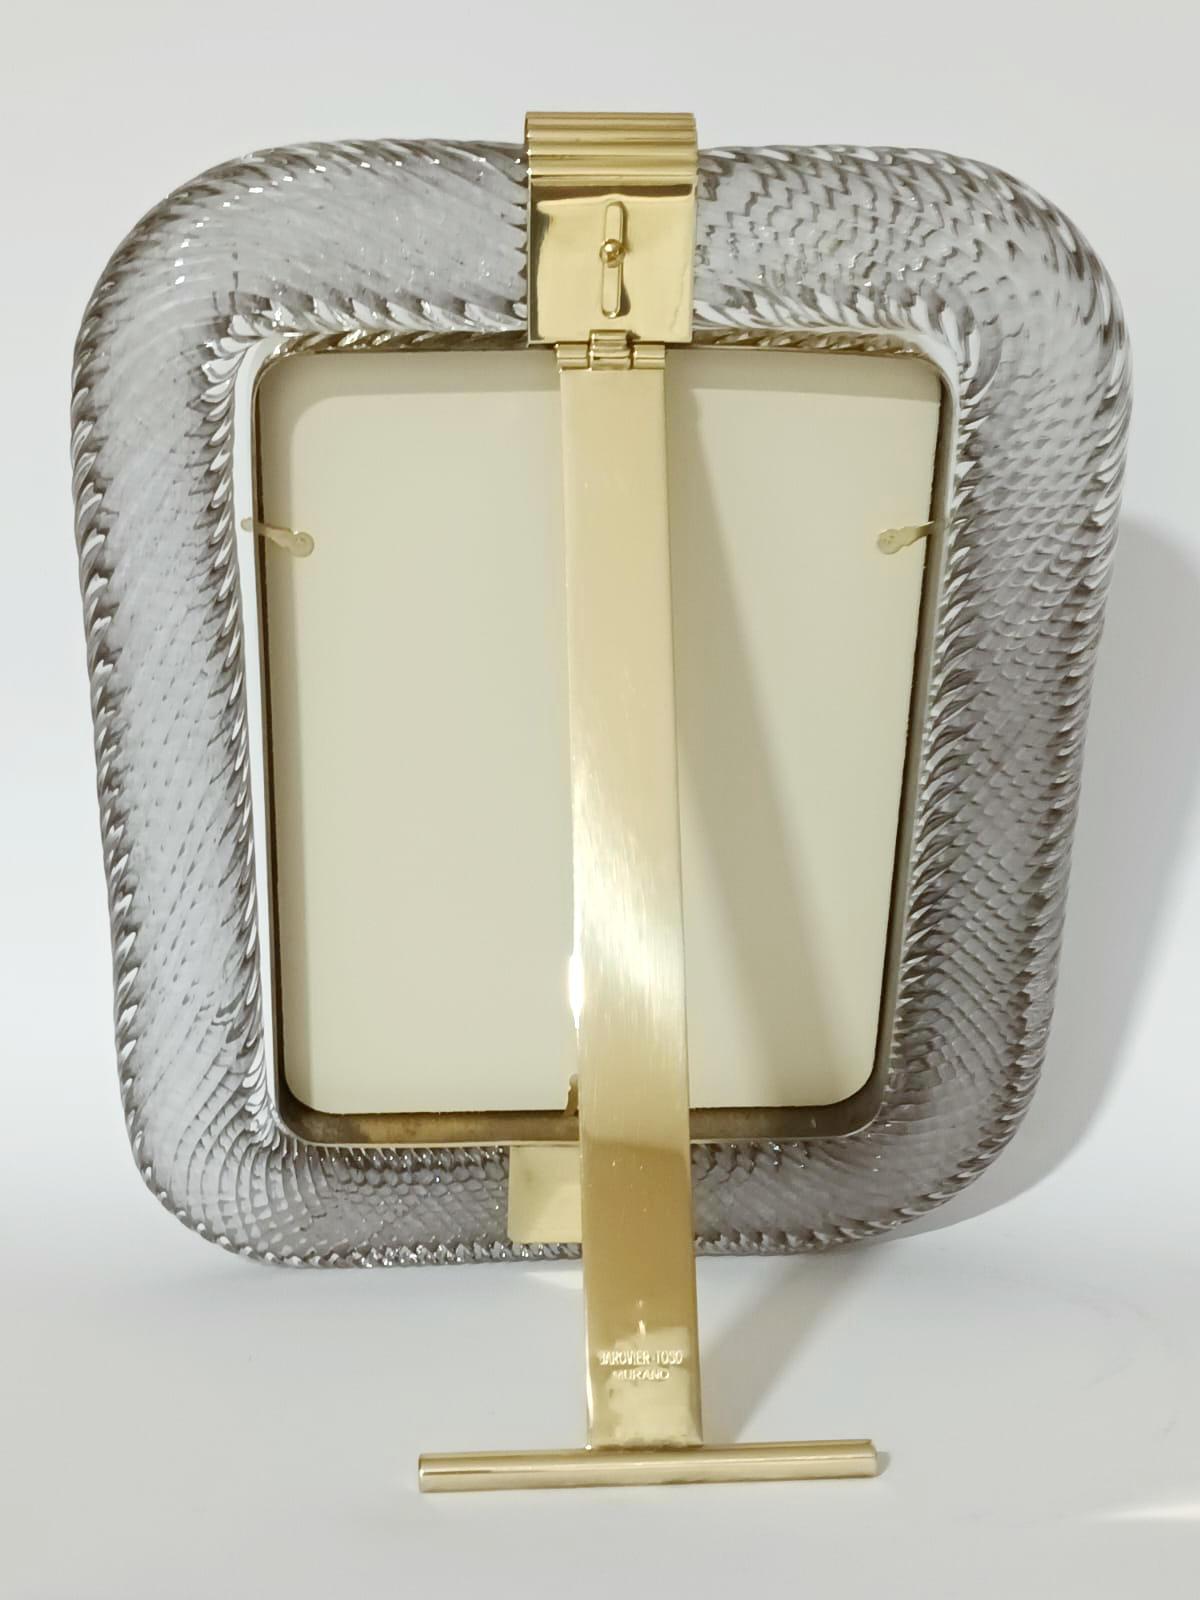 Murano Smoky Photo Frame by Barovier e Toso - 4 Available In Good Condition For Sale In Los Angeles, CA